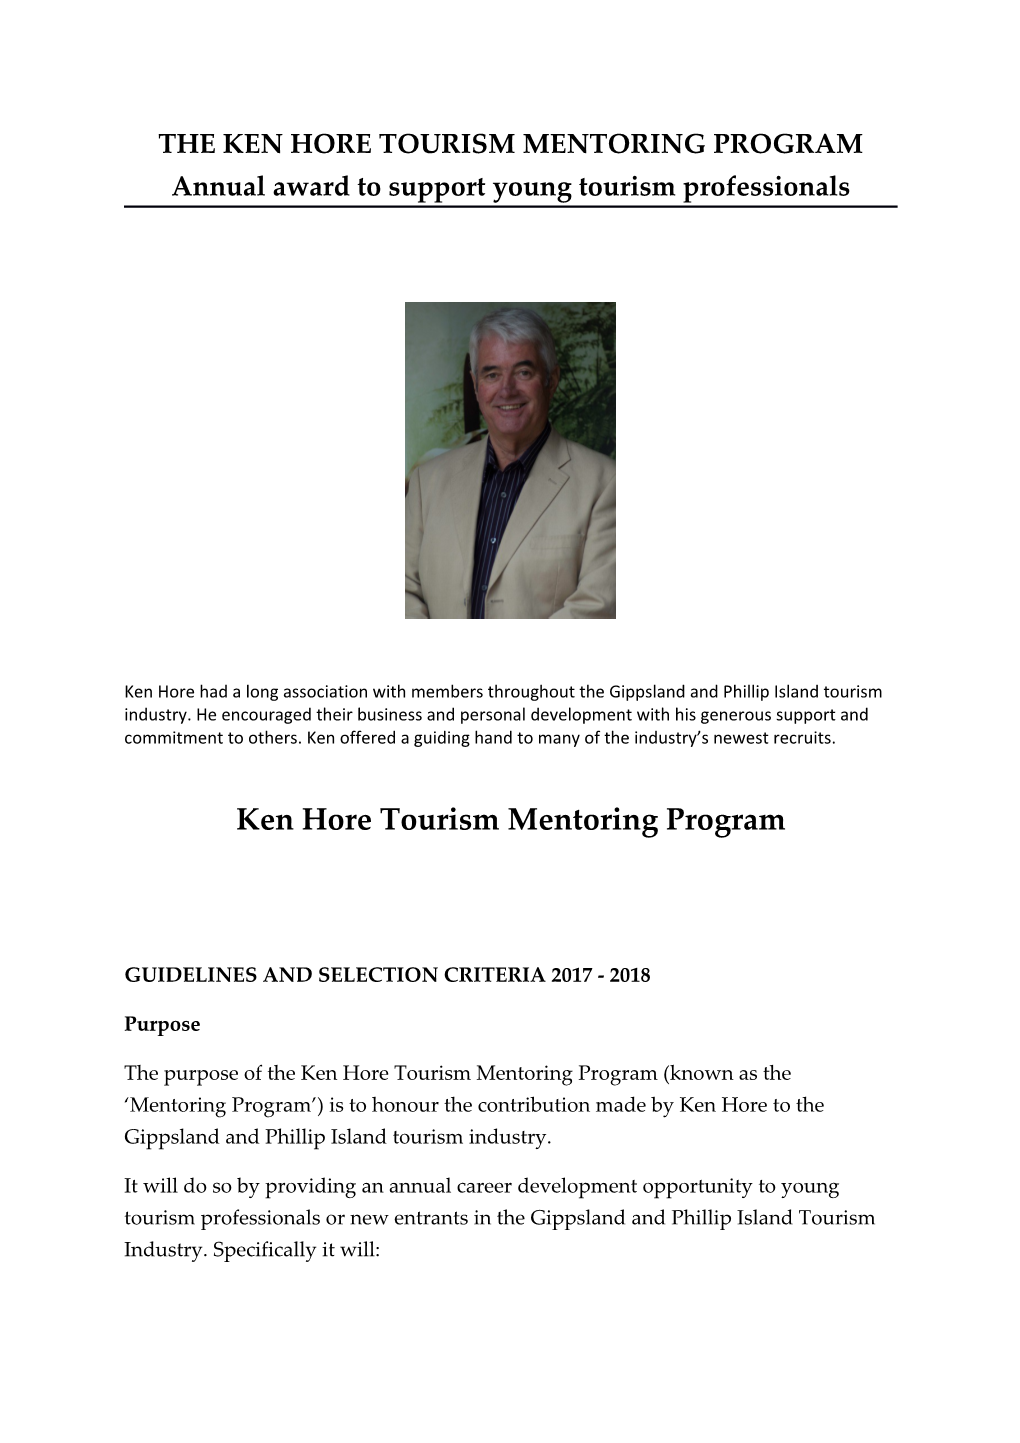 THE KEN HORE TOURISM MENTORING PROGRAM Annual Award to Support Young Tourism Professionals